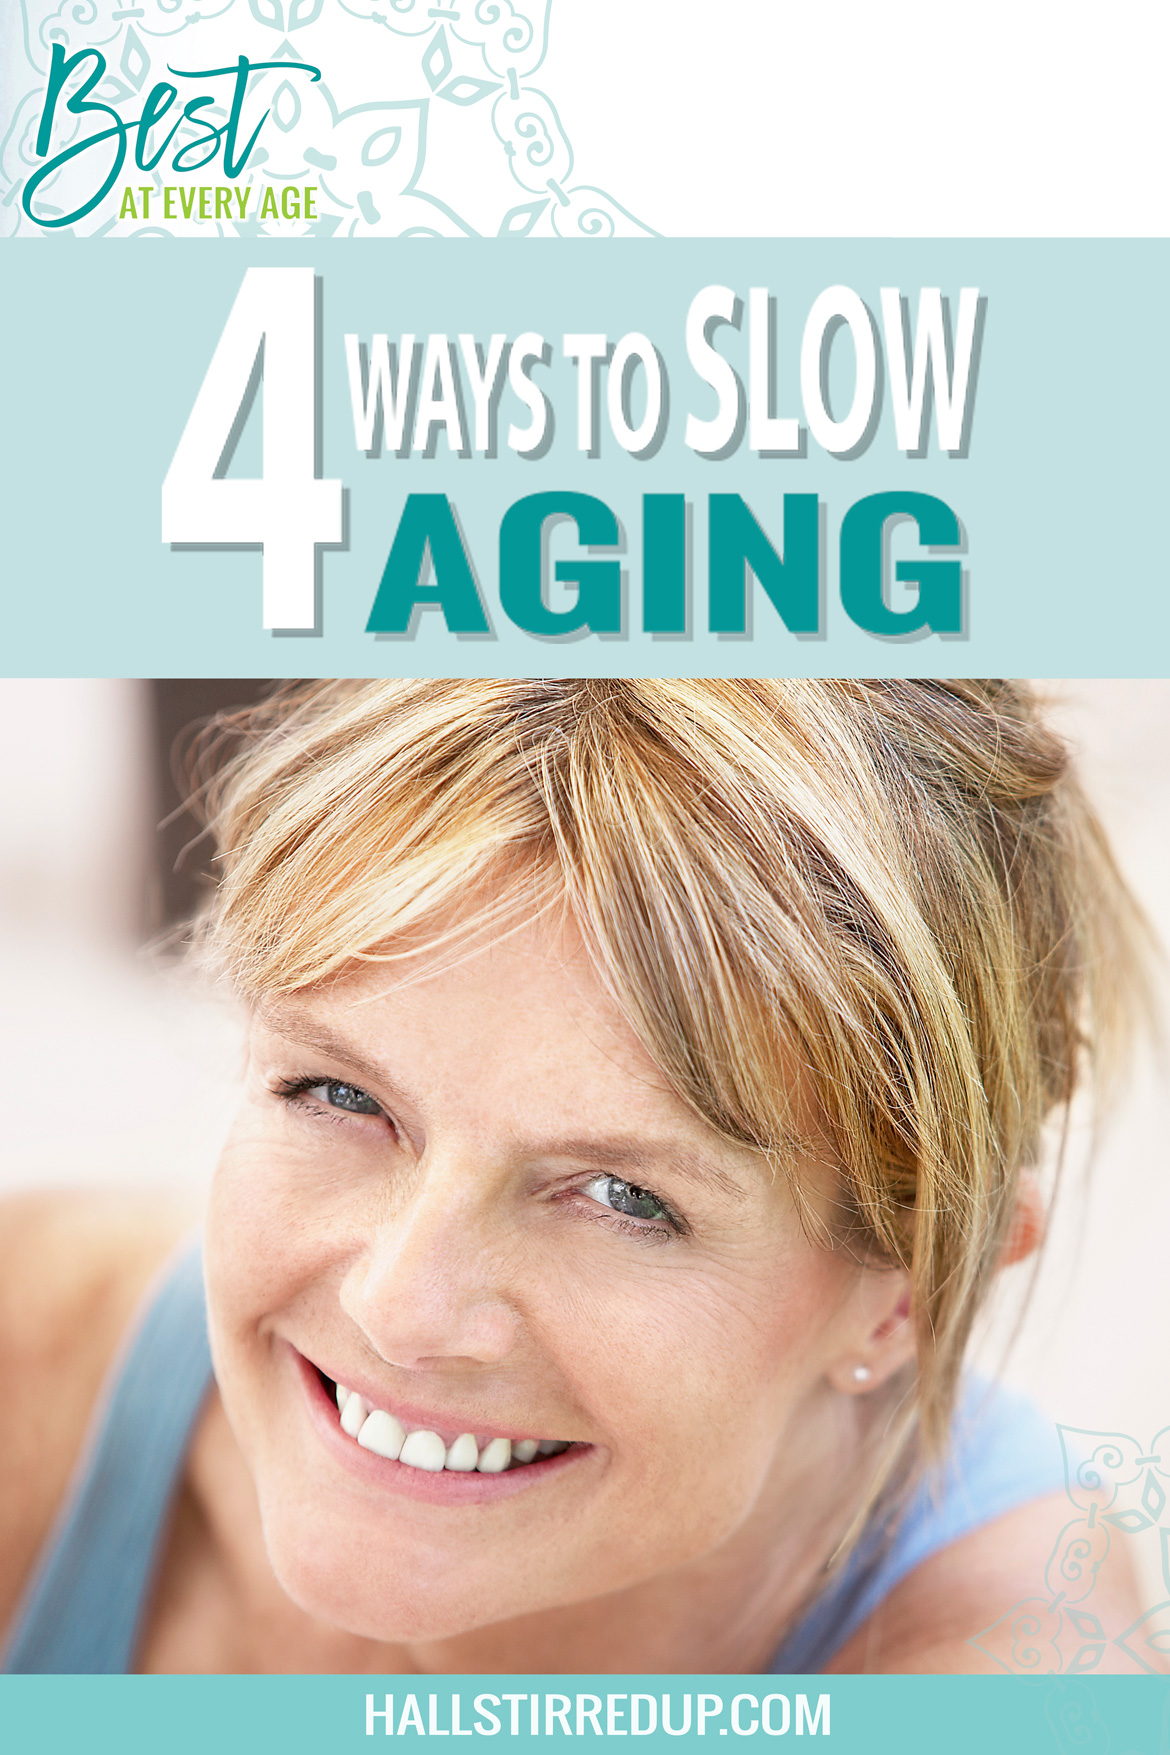 Best at Every Age - 4 Ways to Slow Aging